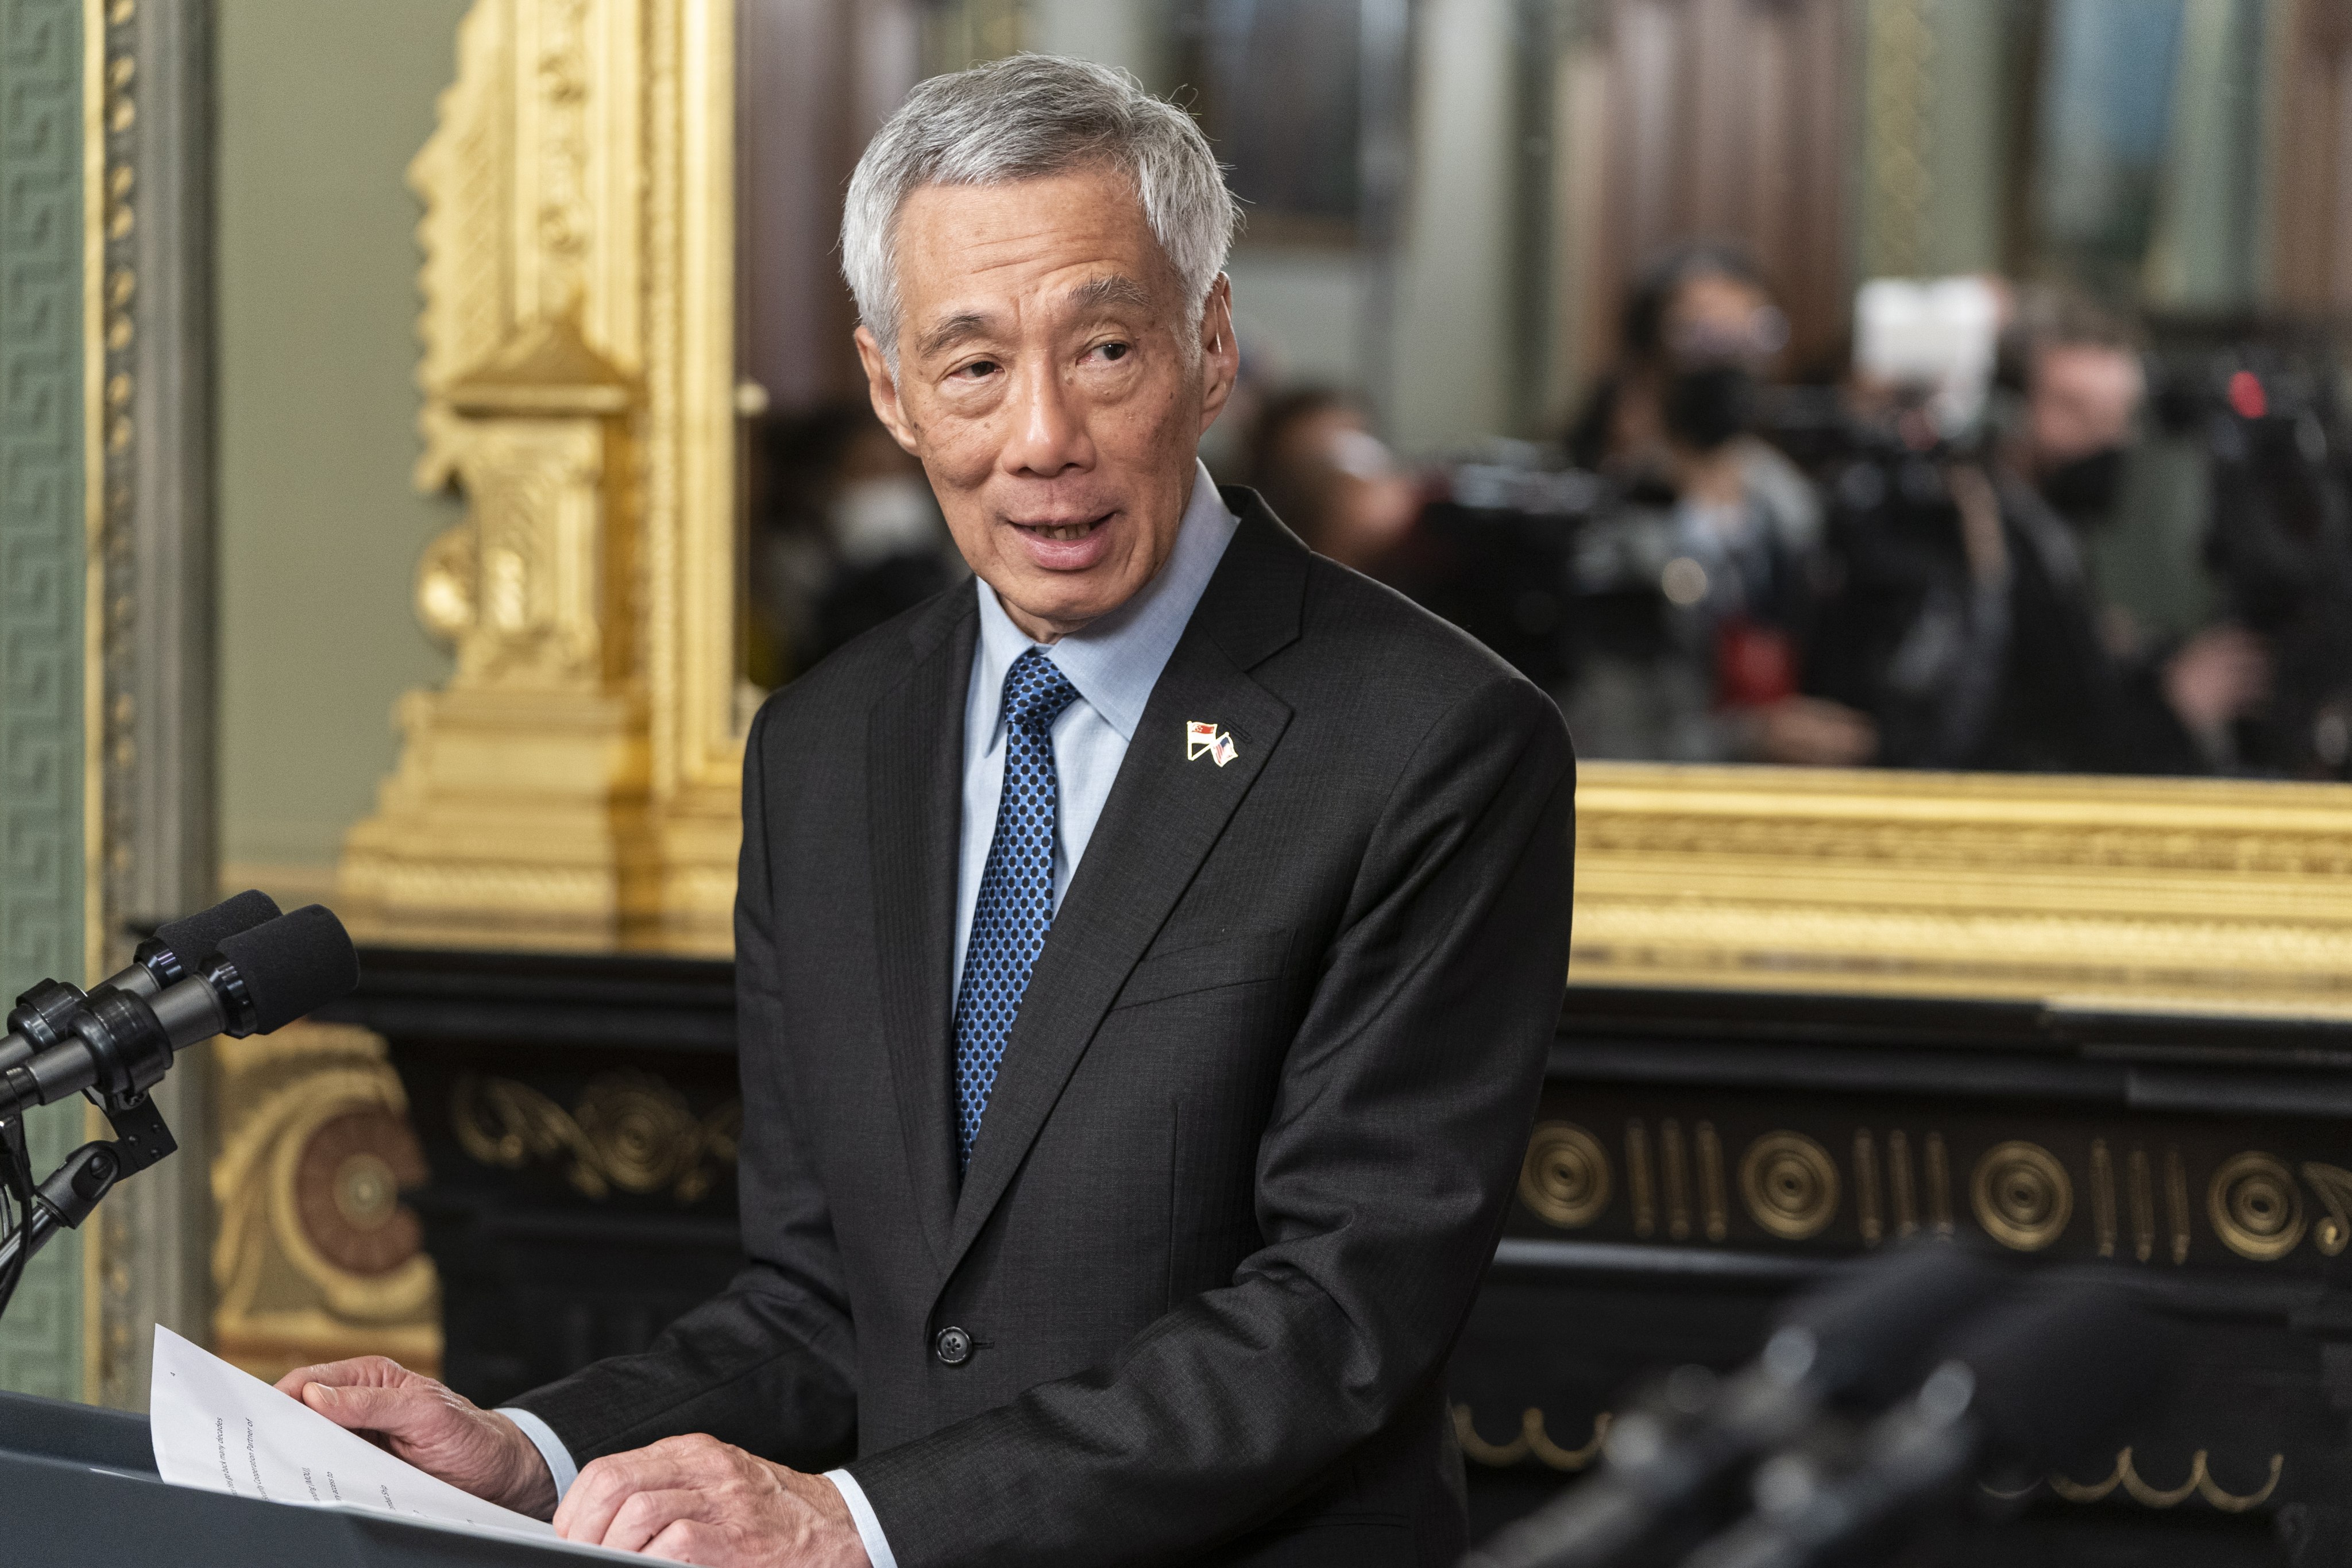 Singapore PM Lee Hsien Loong. File photo: EPA-EFE